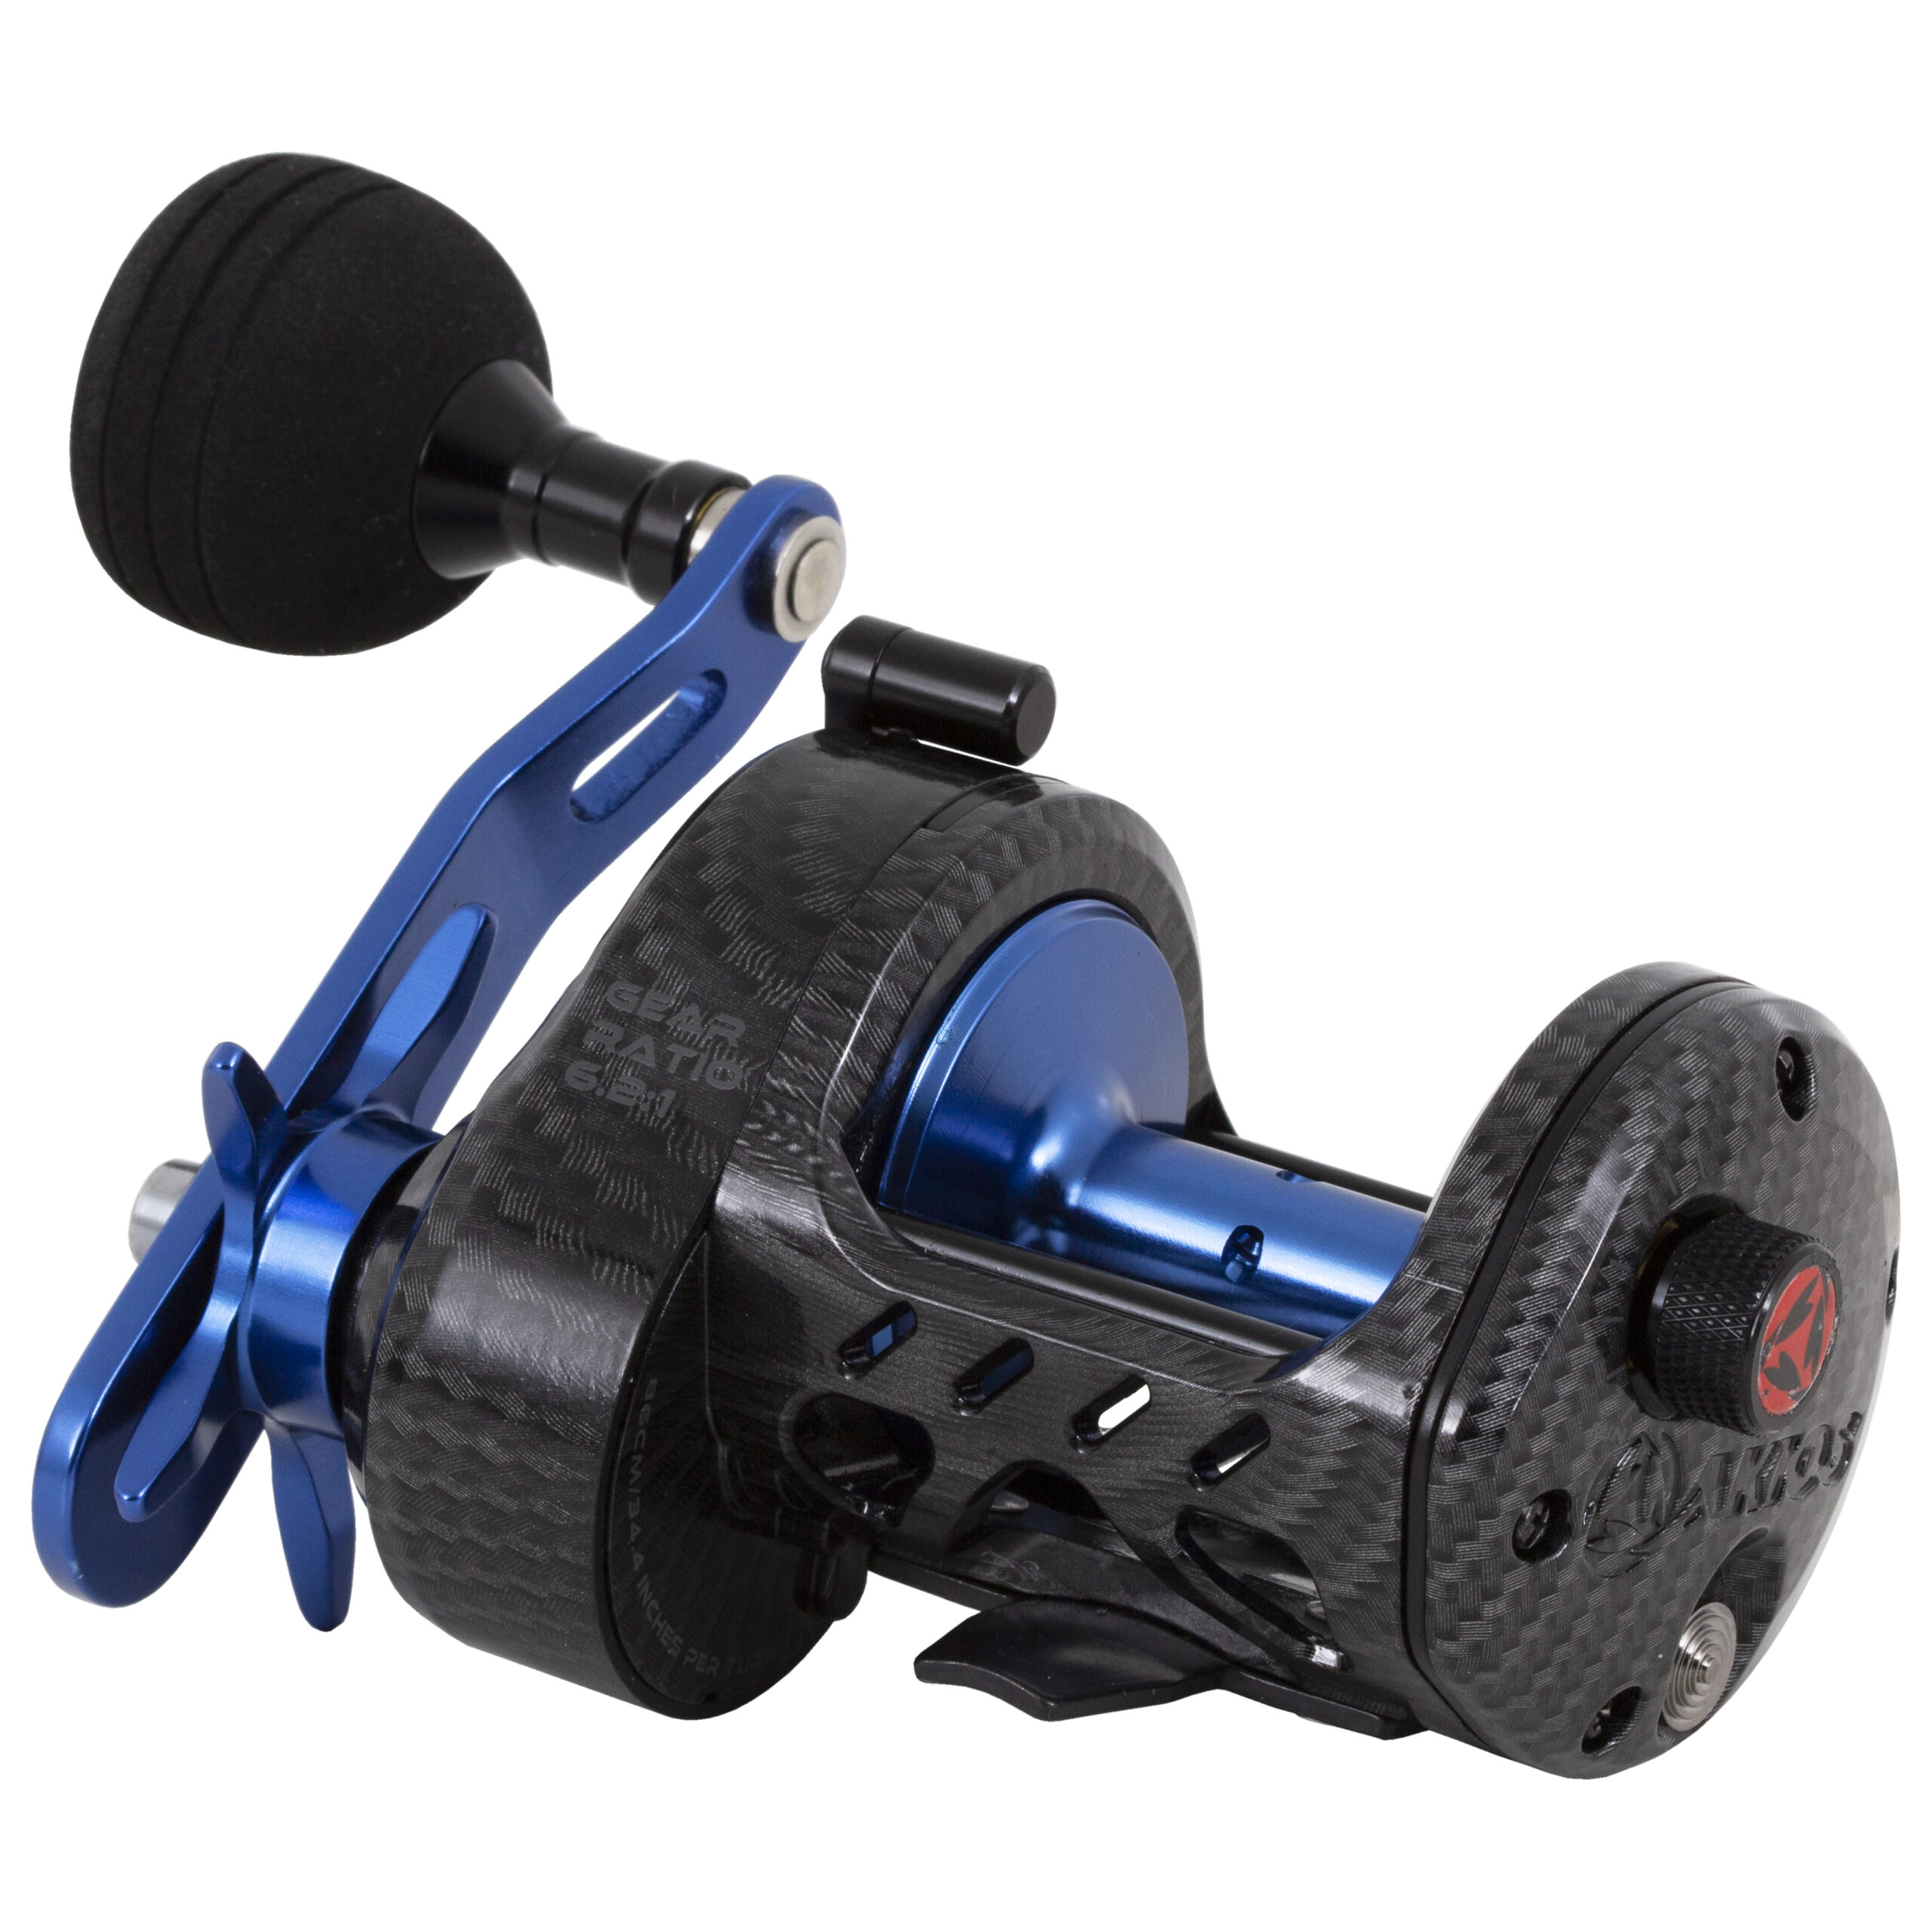 Mitchell Performance Boat Fishing Rod and Multiplier Reel Combo